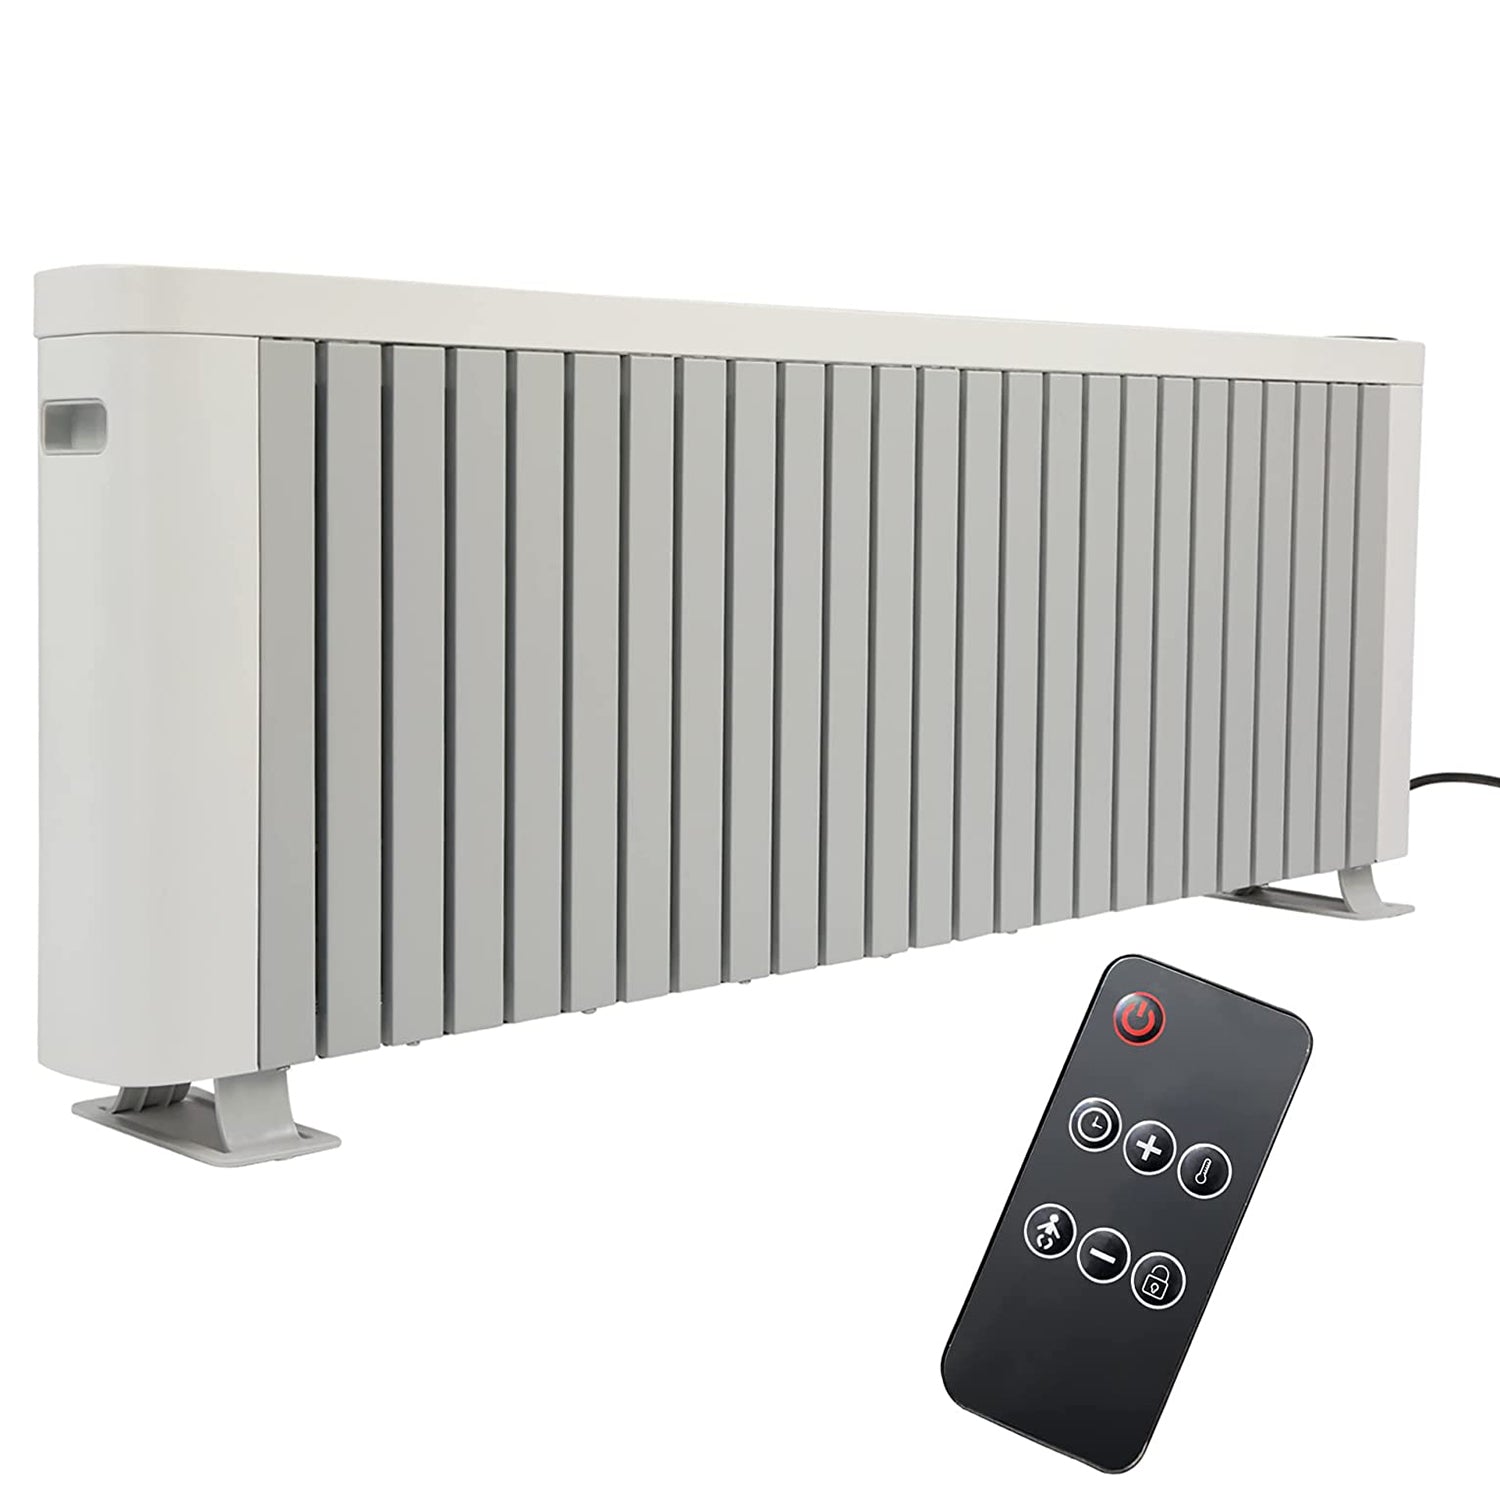 Efficient 1500W Baseboard Electric Heater: Silent Convection Heating, Remote Lock, LED Display, Multi-Protection